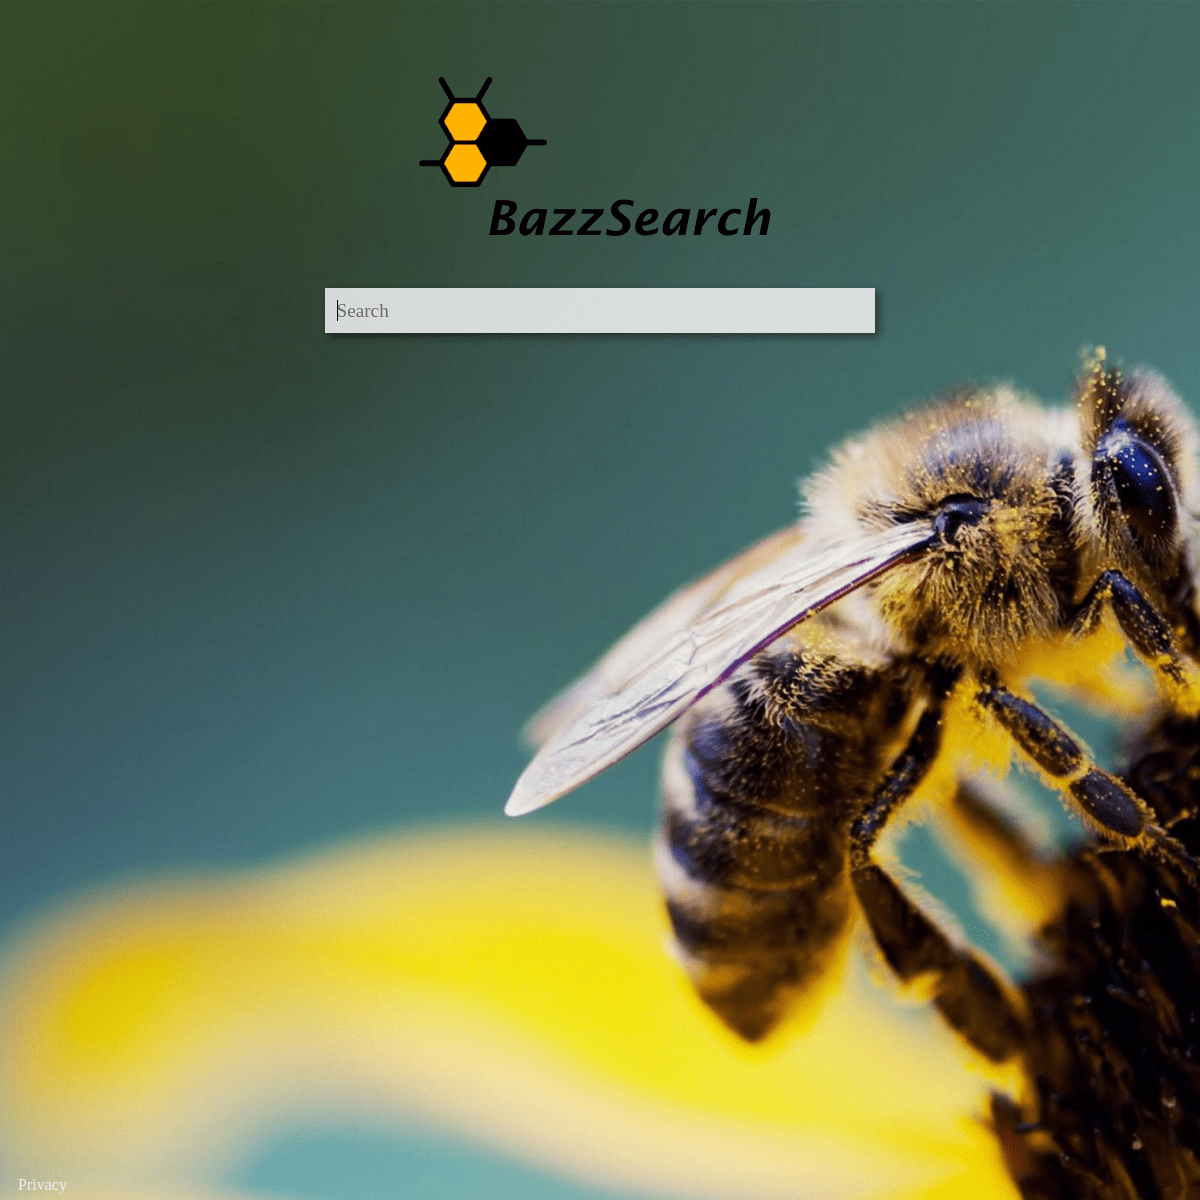 A complete backup of bazzsearch.com